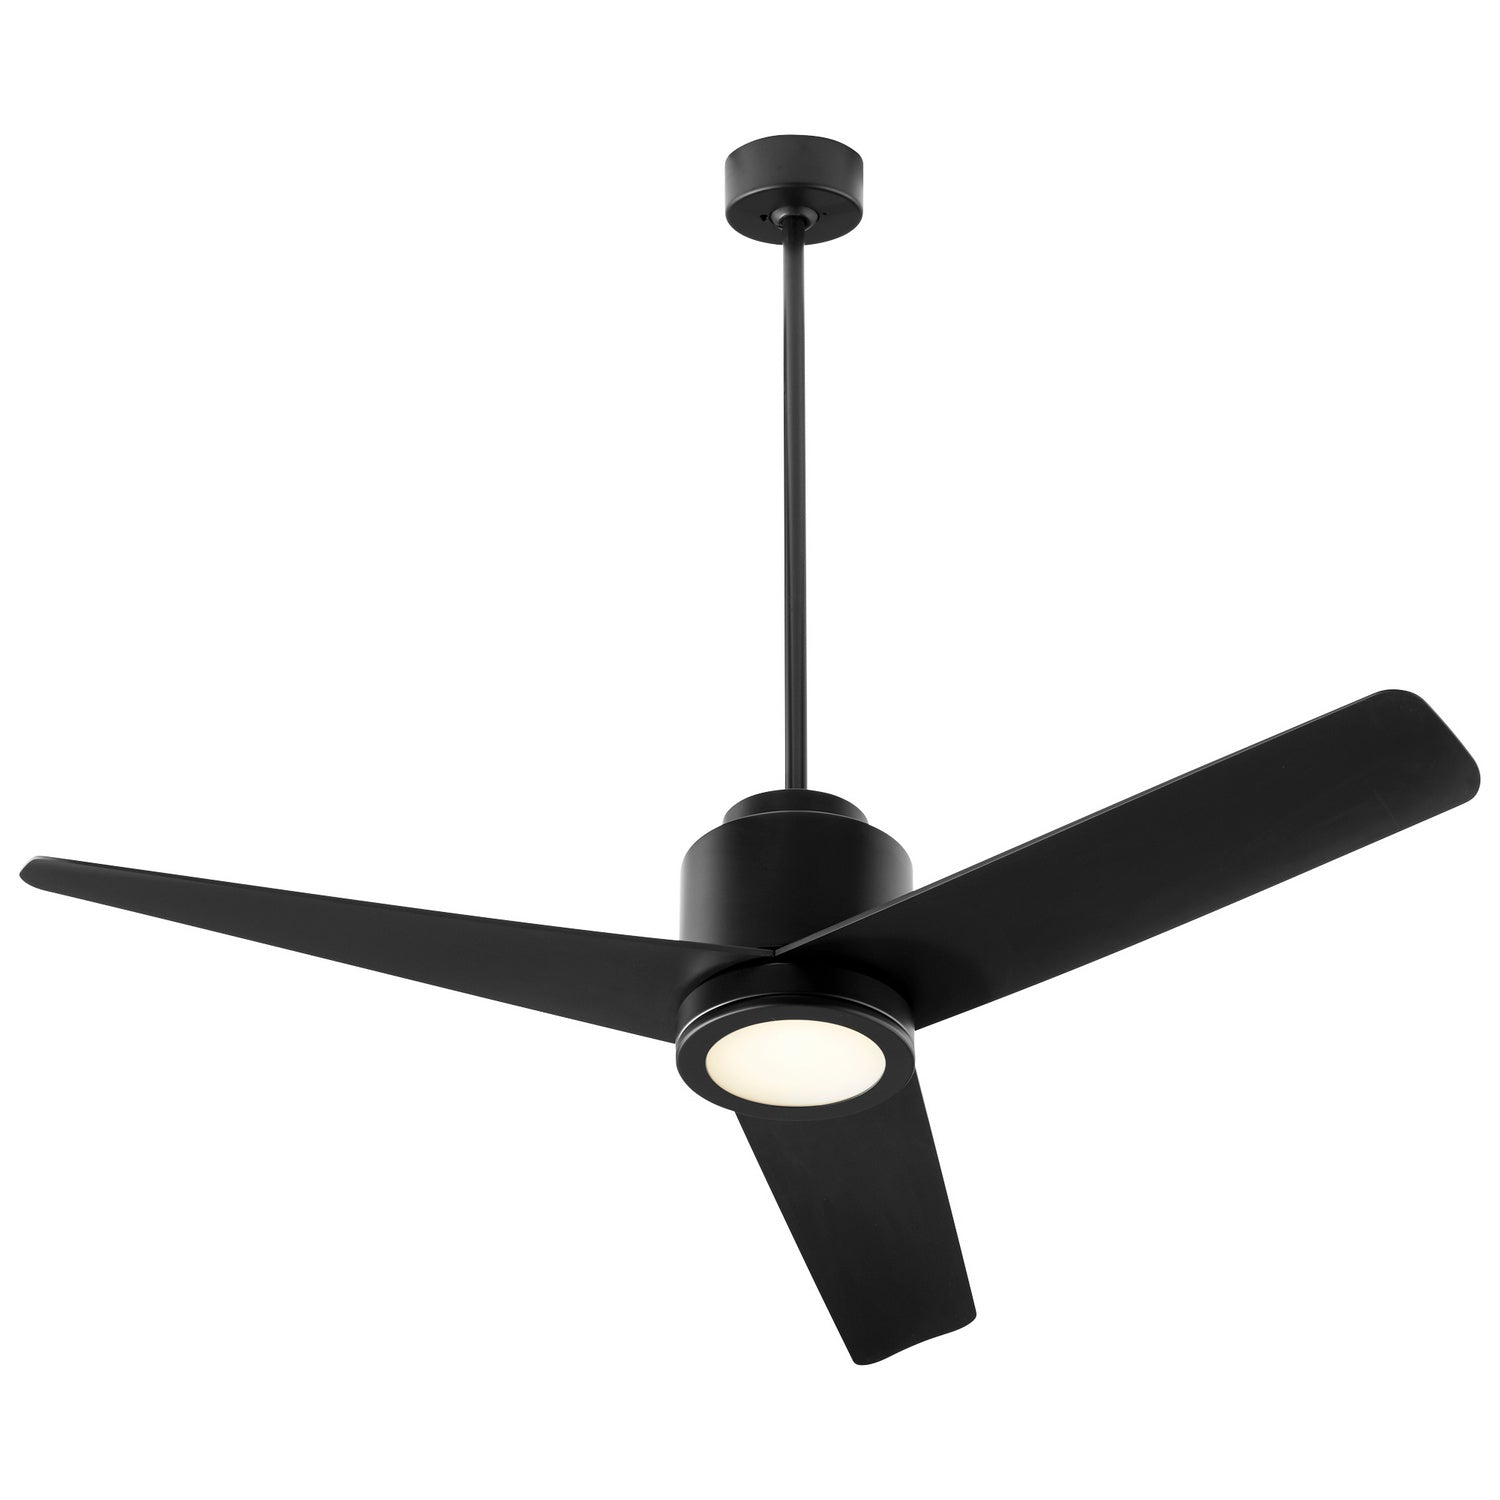 Oxygen ADORA Indoor or Outdoor Downrod Ceiling Fan, 52 Inch Blade Span, Wet Rated – Black, Satin Nickel, or White